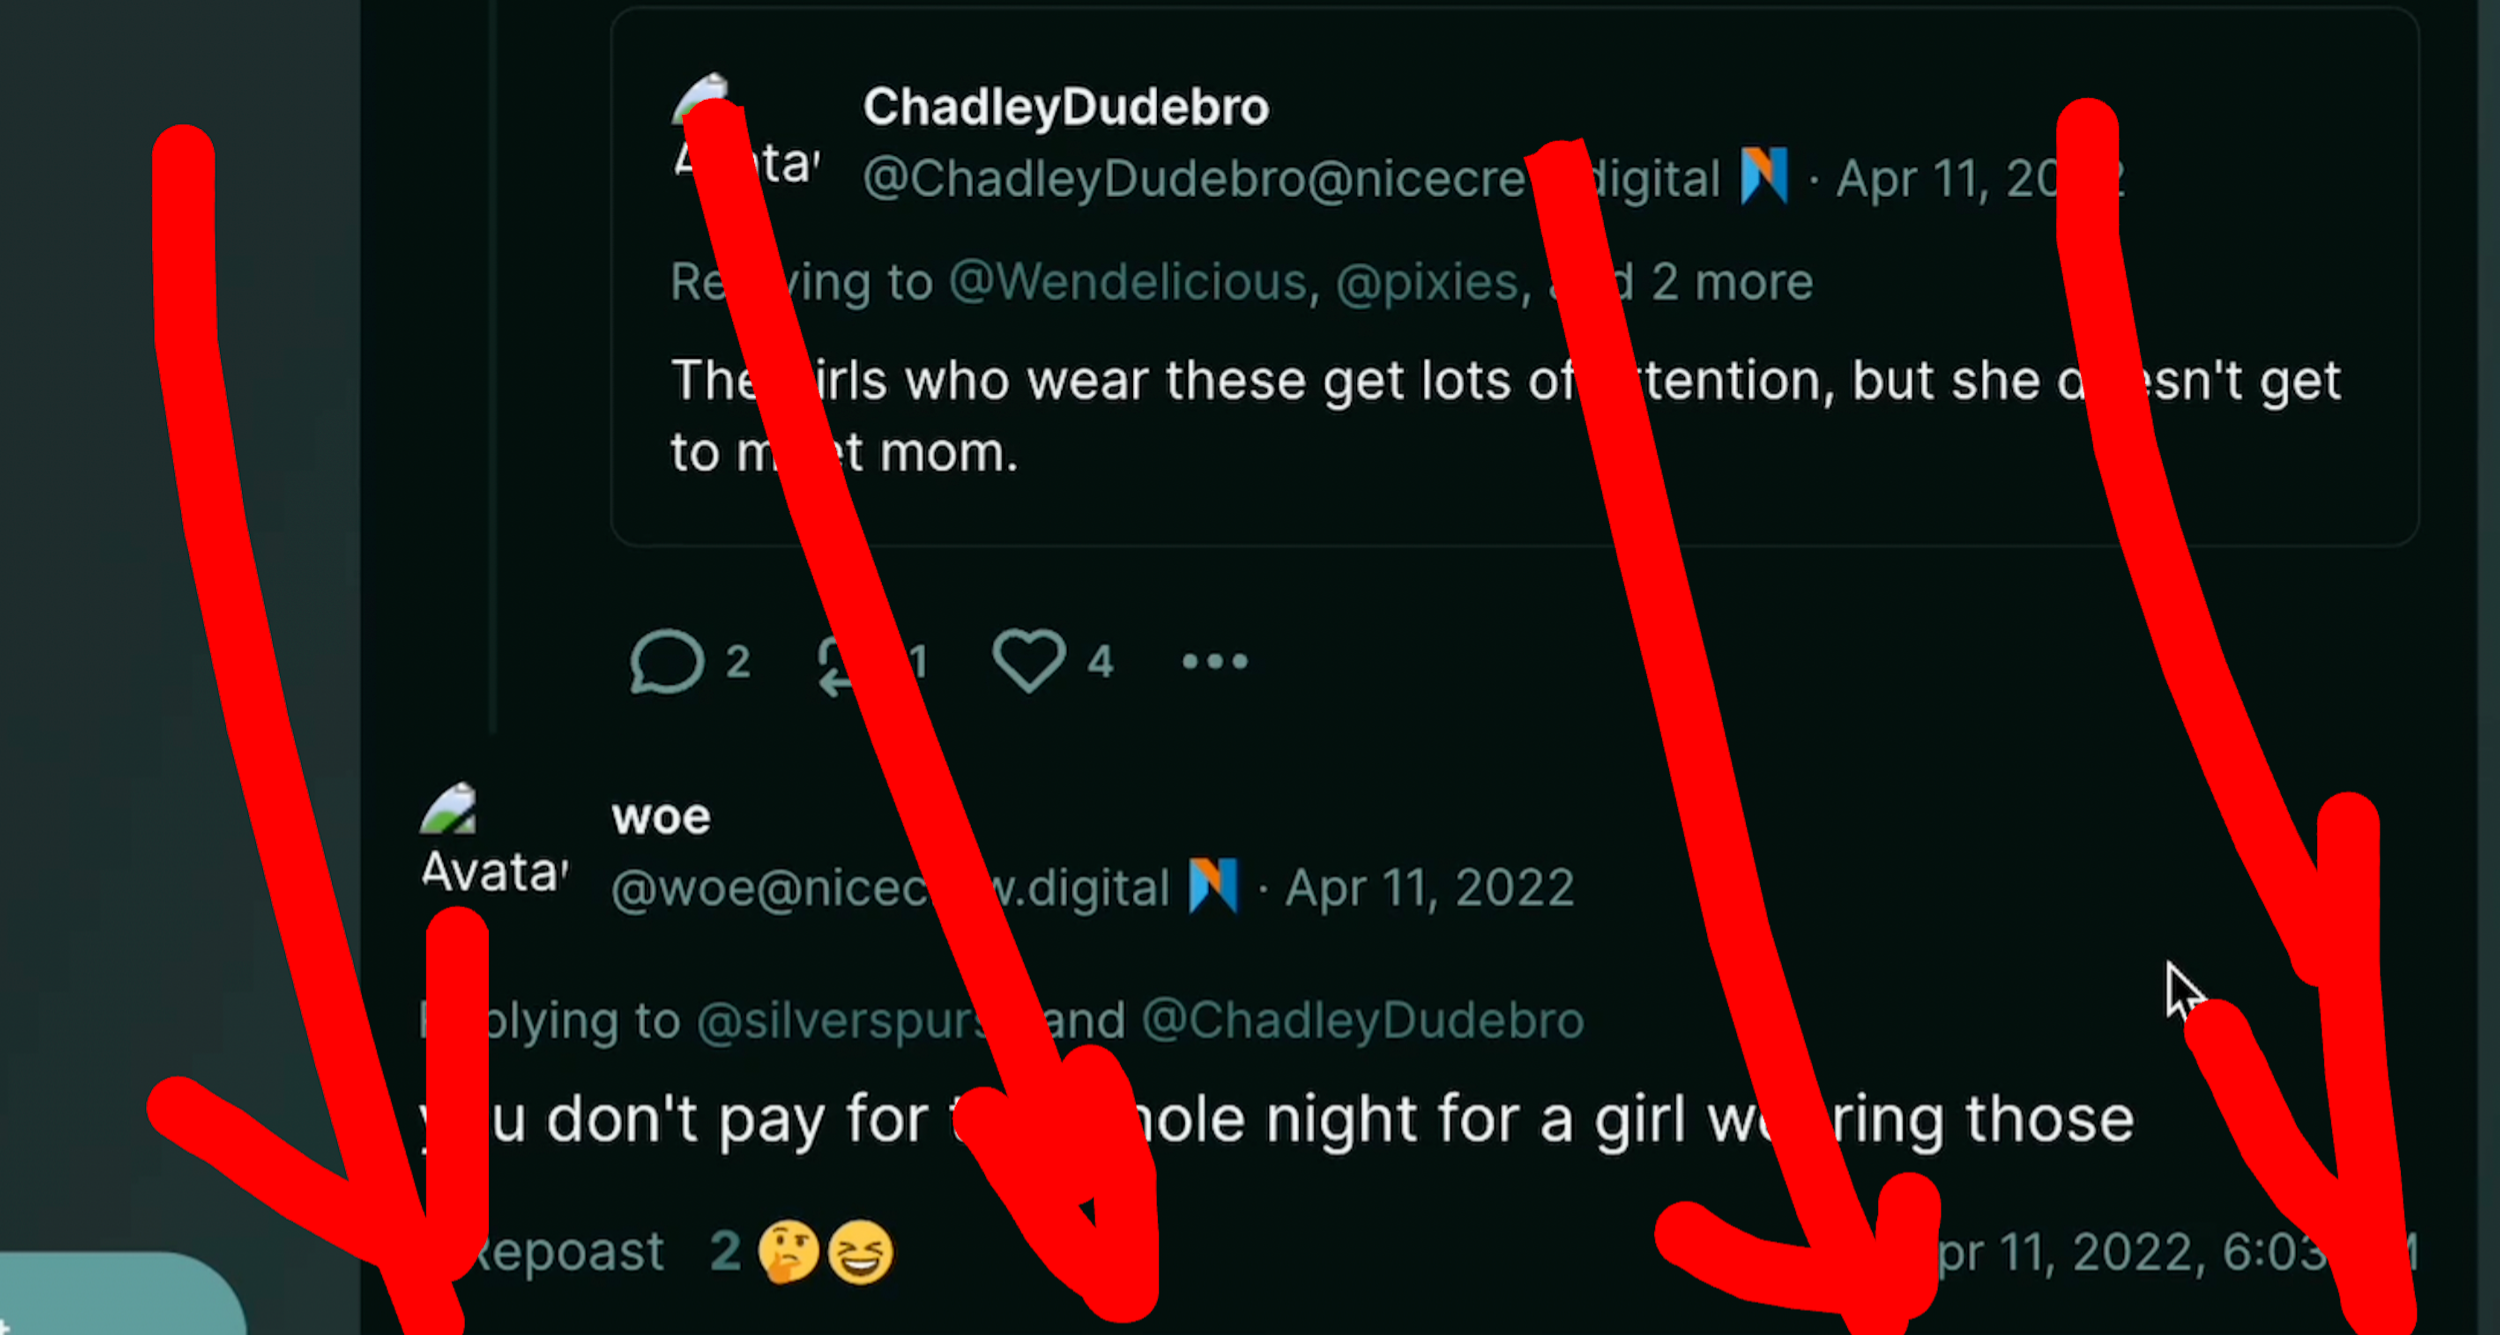 TW: misogyny. "ChadleyDudebro": "The girls who wear these get lots of attention, but she doesn't get to meet mom." Dumperth: "you don't pay for the whole night for a girl wearing those."